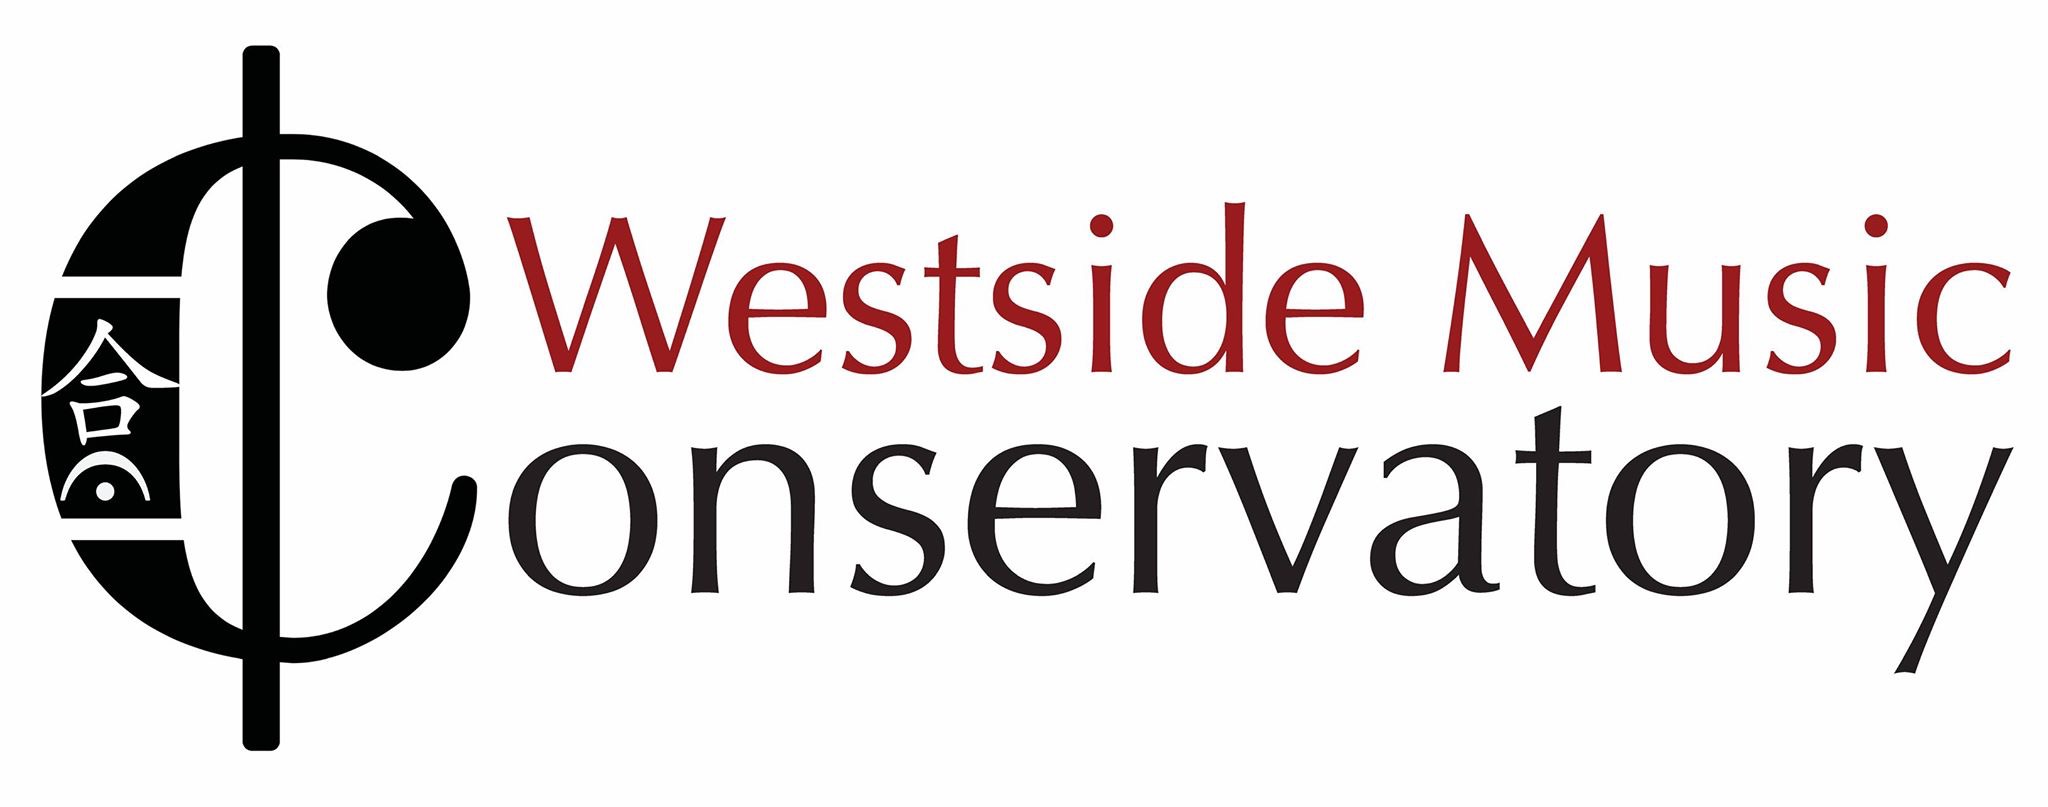 Chamber Music Concert at the Westside Music Conservatory